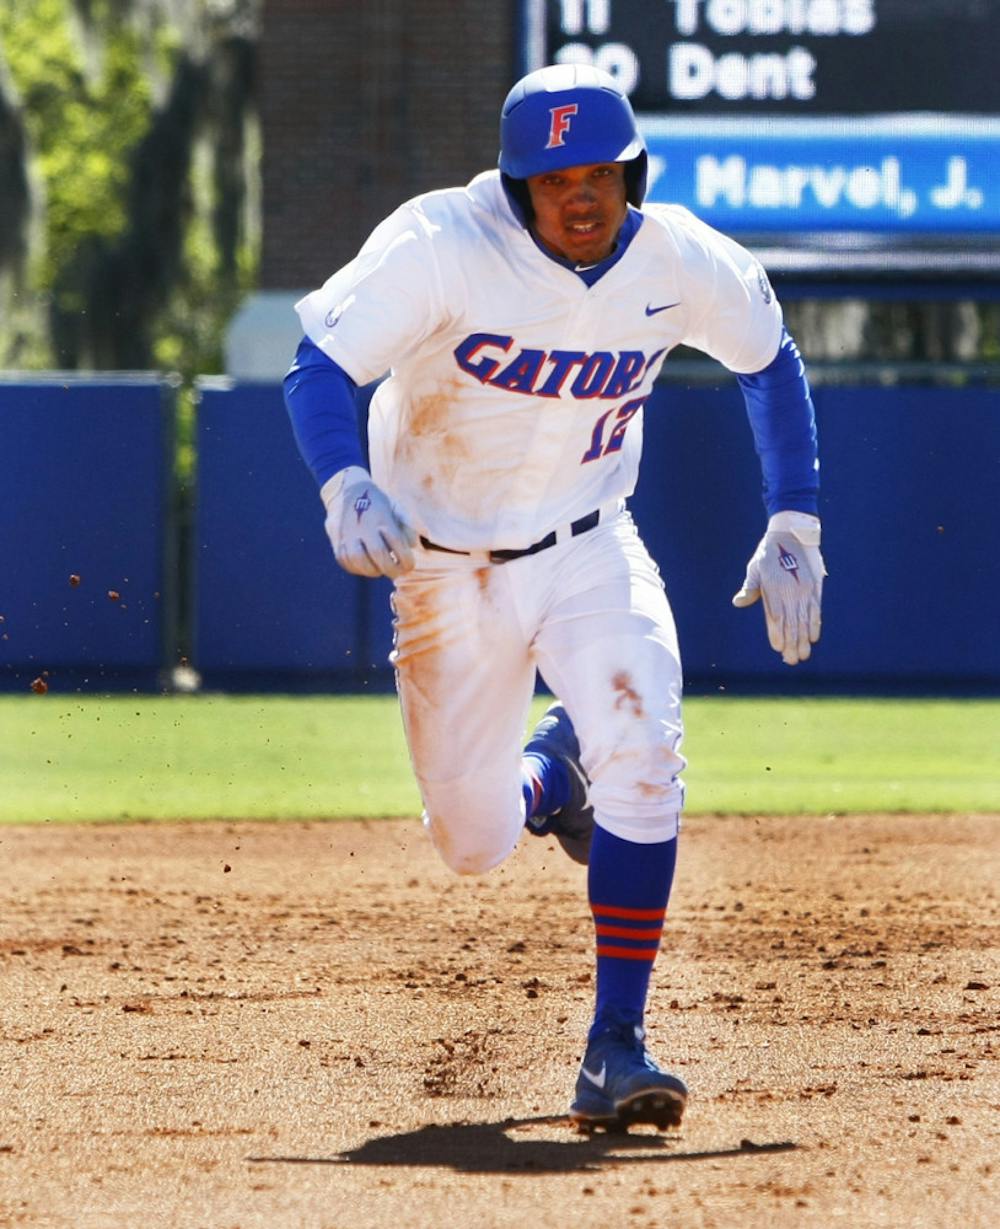 <p><span>Freshman shortstop Richie Martin attempts to steal third base during Florida’s 16-5 win against Duke on Sunday at McKethan Stadium. Martin left Florida's 6-3 series-clinching win against Miami on Sunday after beating hit by a pitch in the hand. </span></p>
<div><span><br /></span></div>